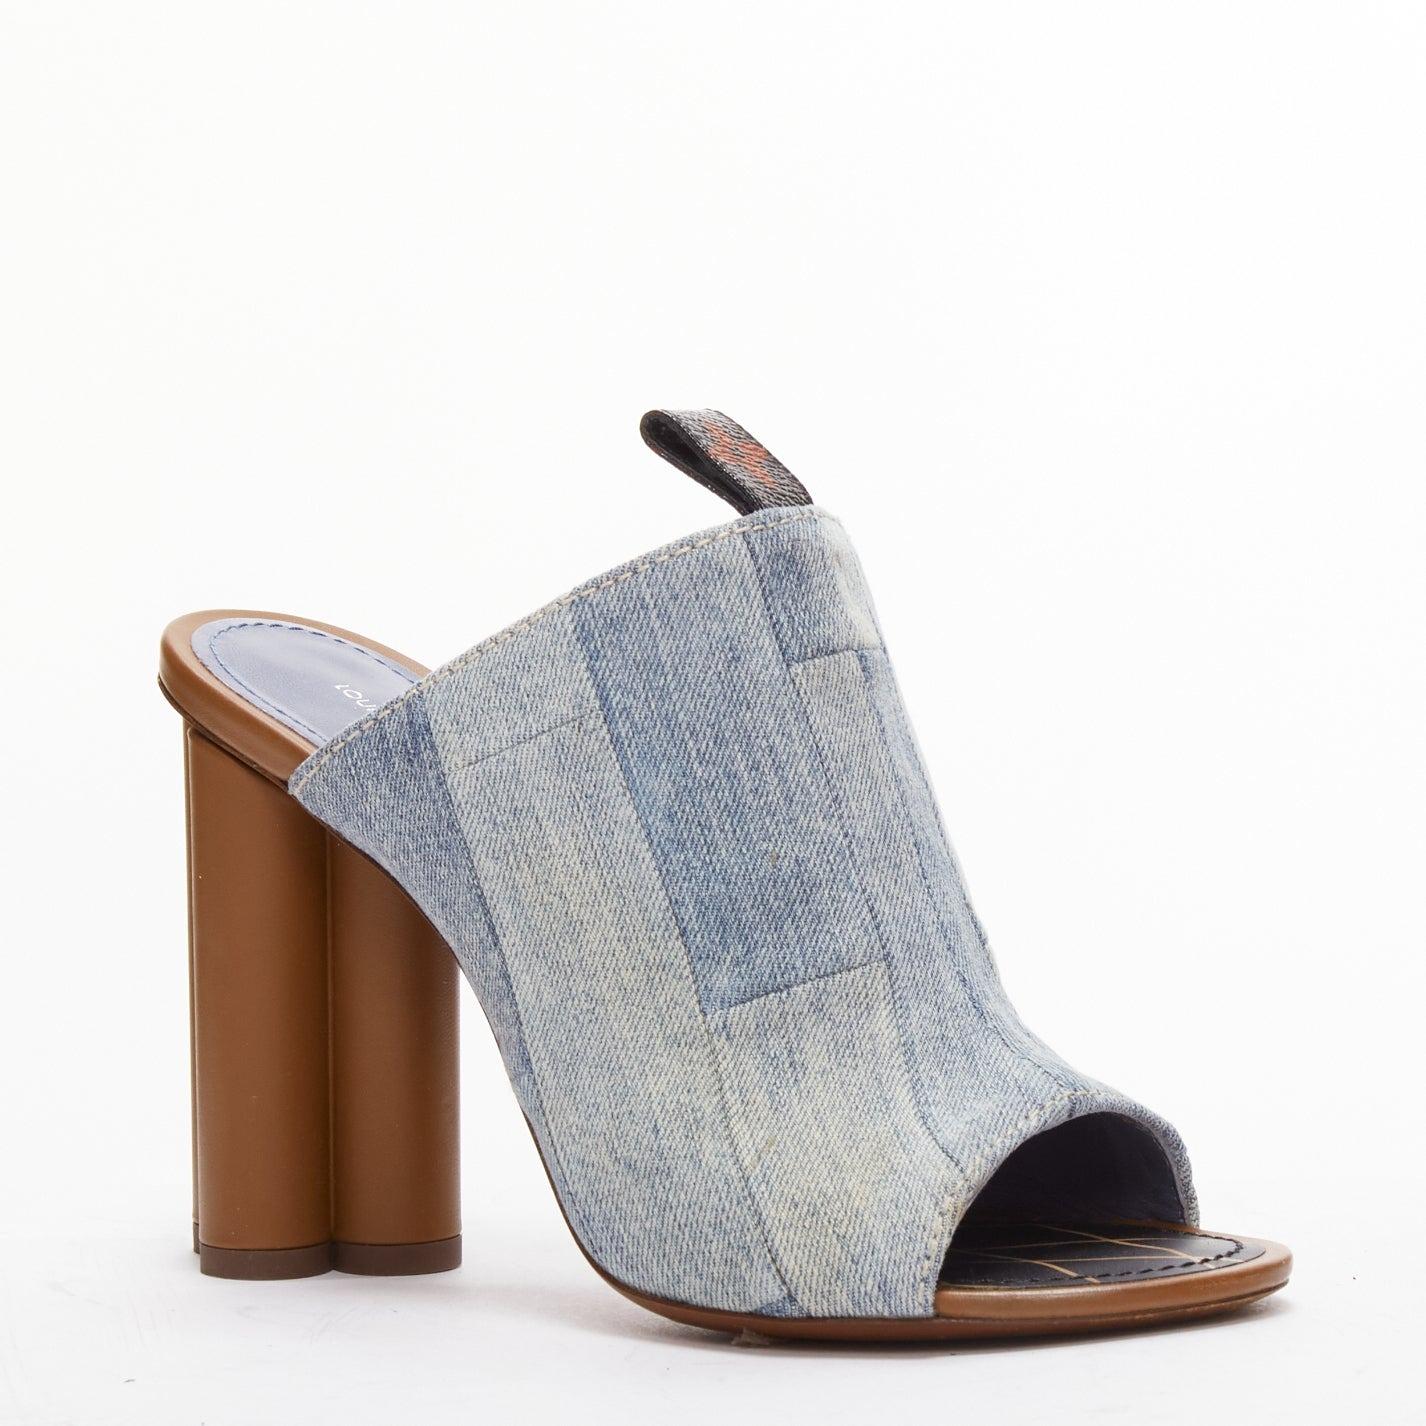 LOUIS VUITTON brown LV flower heel denim patchwork mules EU38
Reference: MEKK/A00007
Brand: Louis Vuitton
Material: Denim, Leather
Color: Brown, Blue
Pattern: Solid
Closure: Slip On
Lining: Blue Leather
Extra Details: LV flower shaped heels.
Made